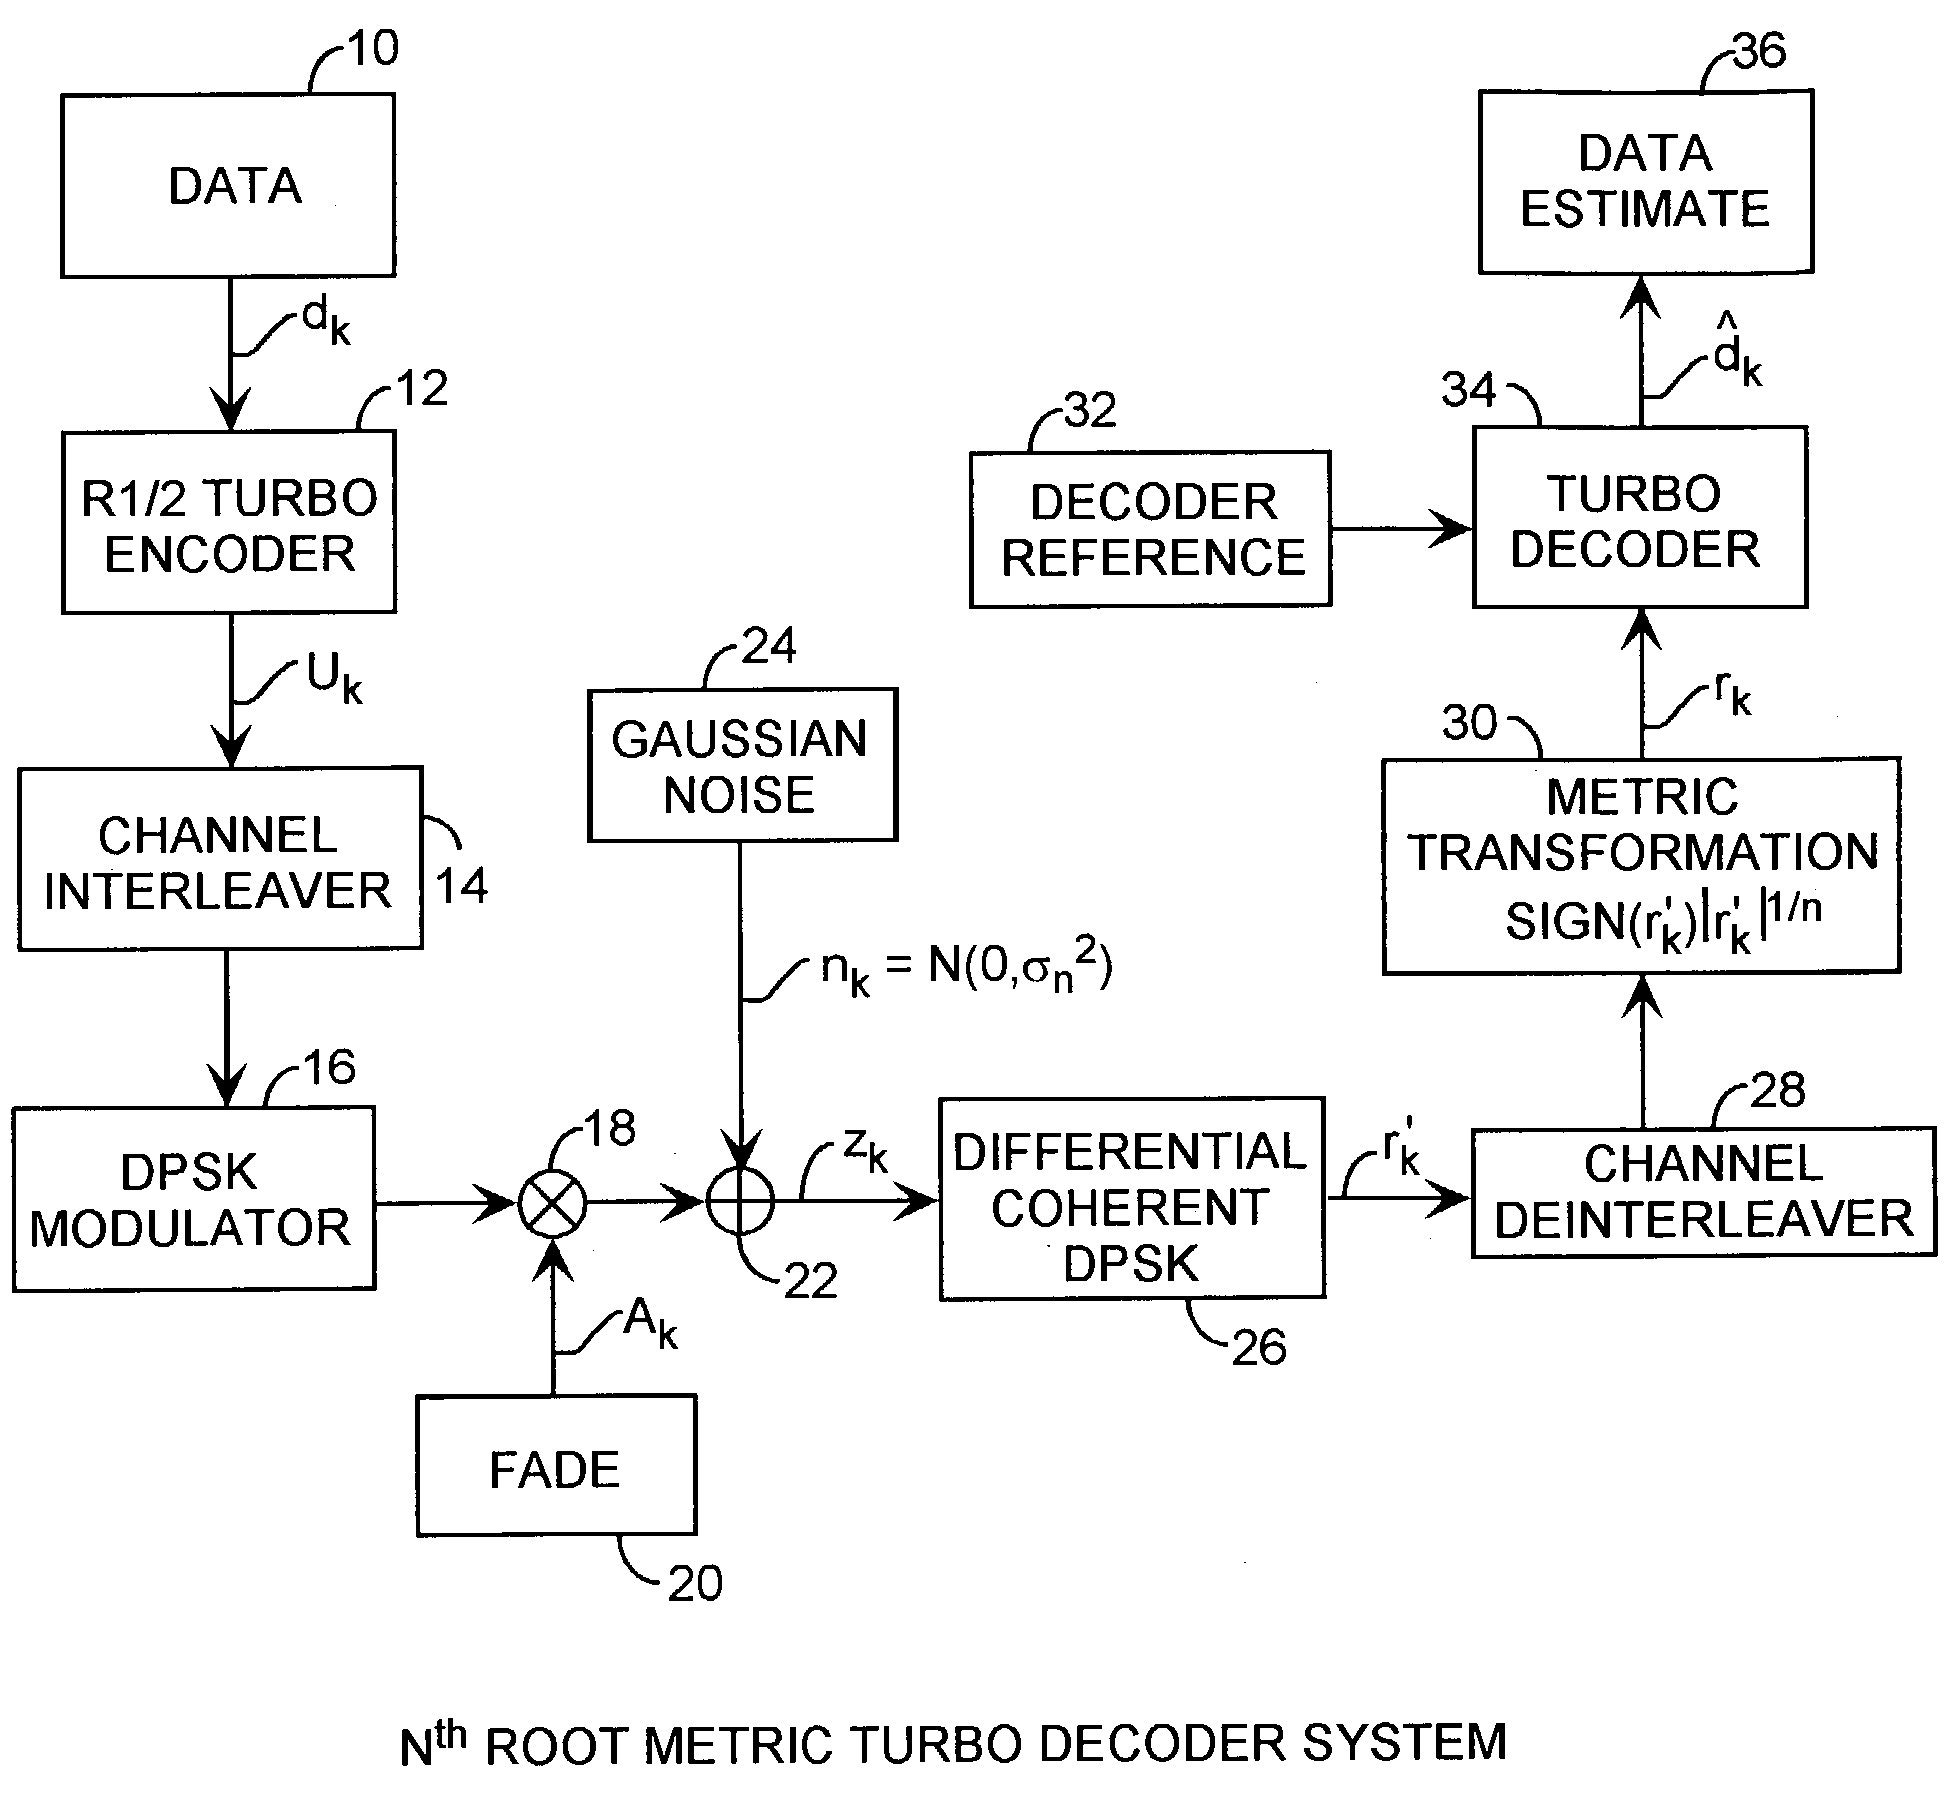 Turbo decoding system using NTH root metrics for non-Gaussian communication channels